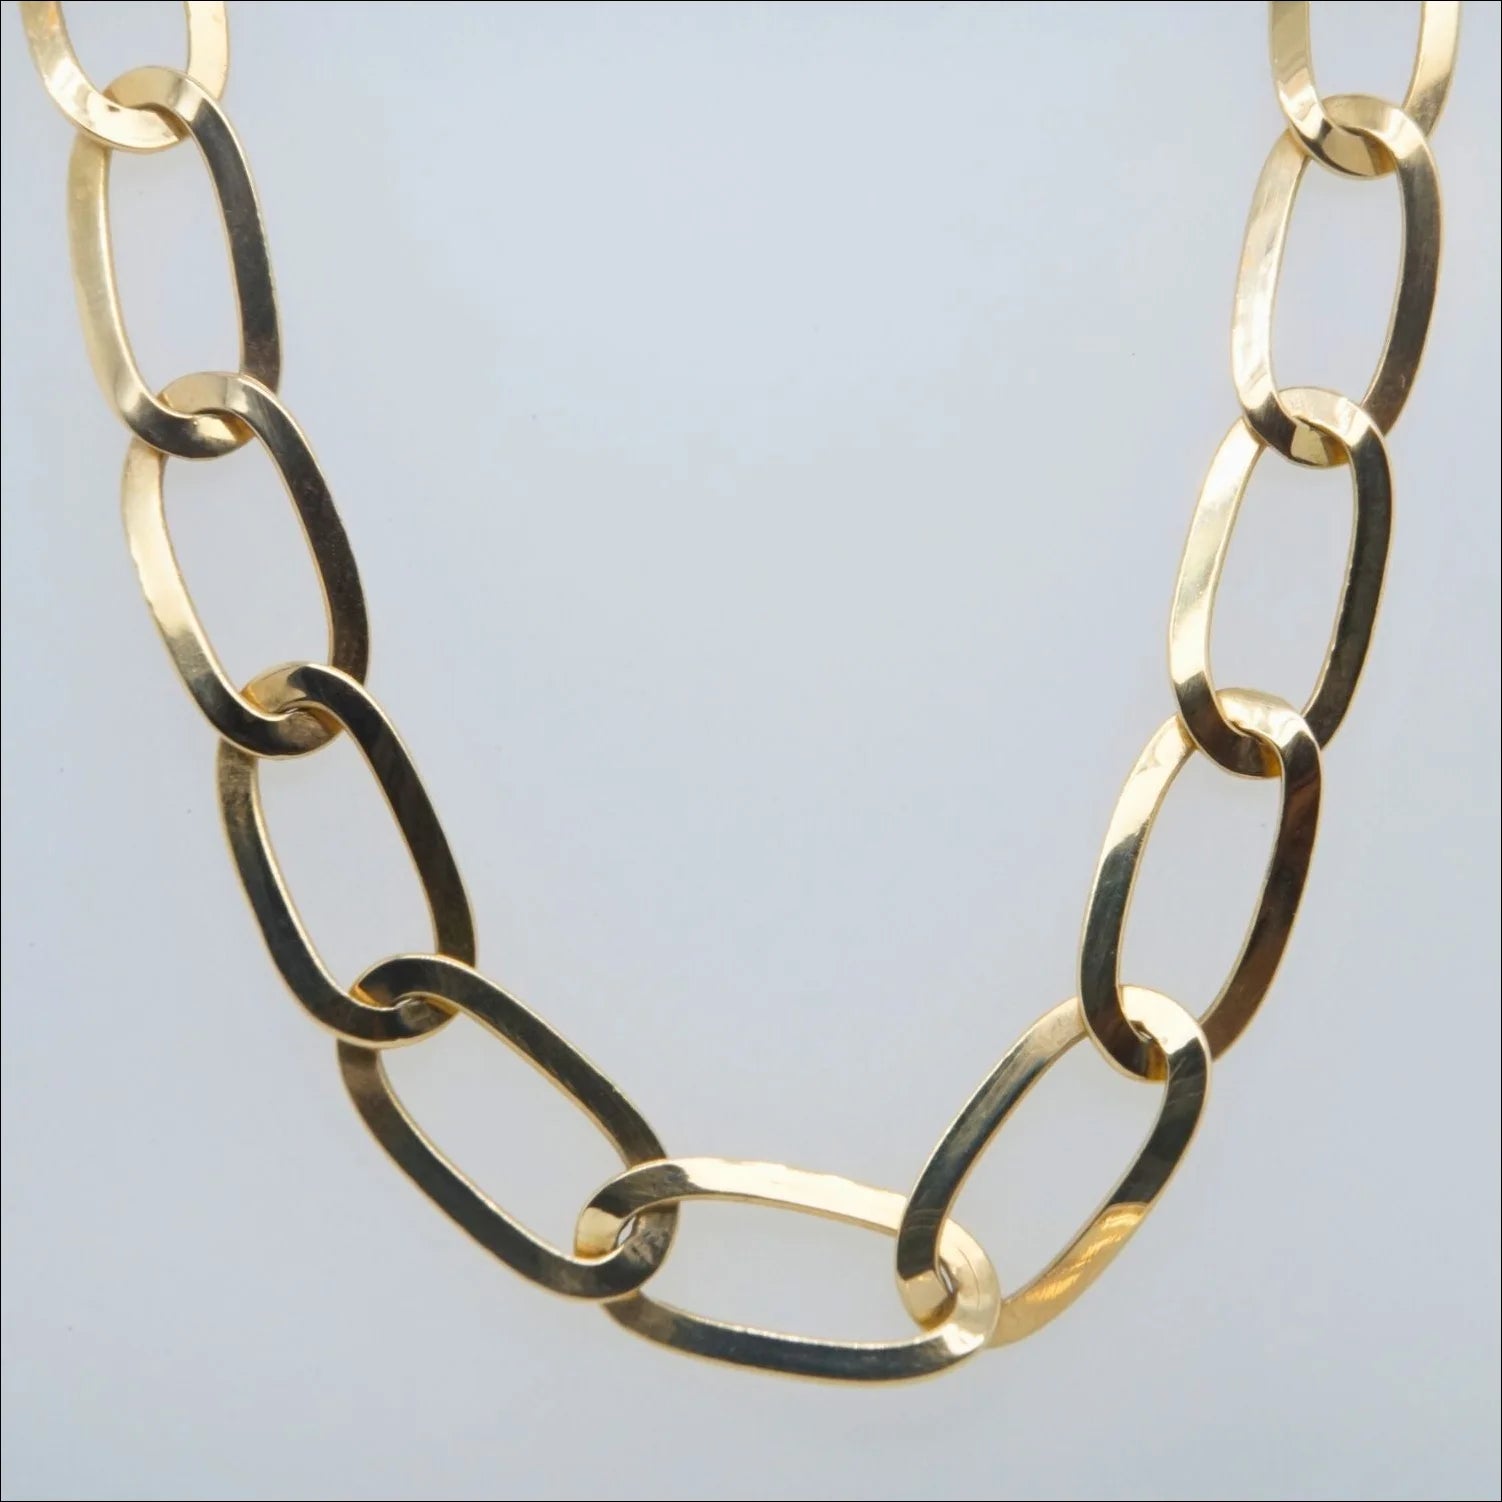 Exquisite Art Gold 18k Chain | Above $1000